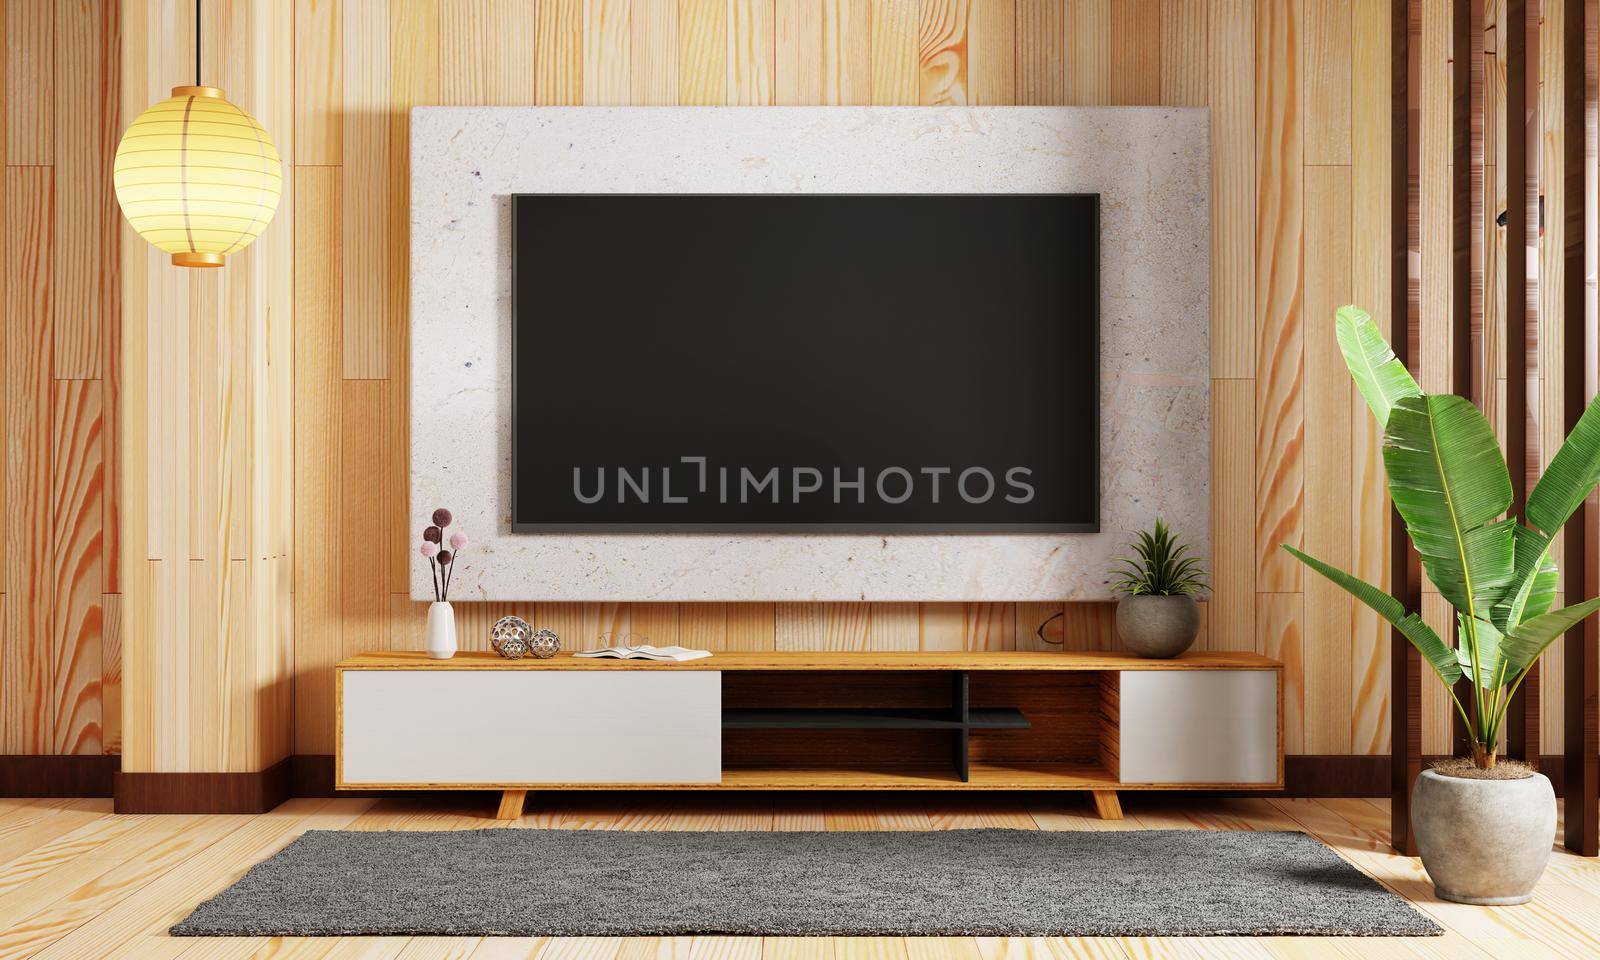 Japanese style modern living room with hanging mockup television tv on wall background. Interior and architecture concept. 3D illustration rendering by MiniStocker